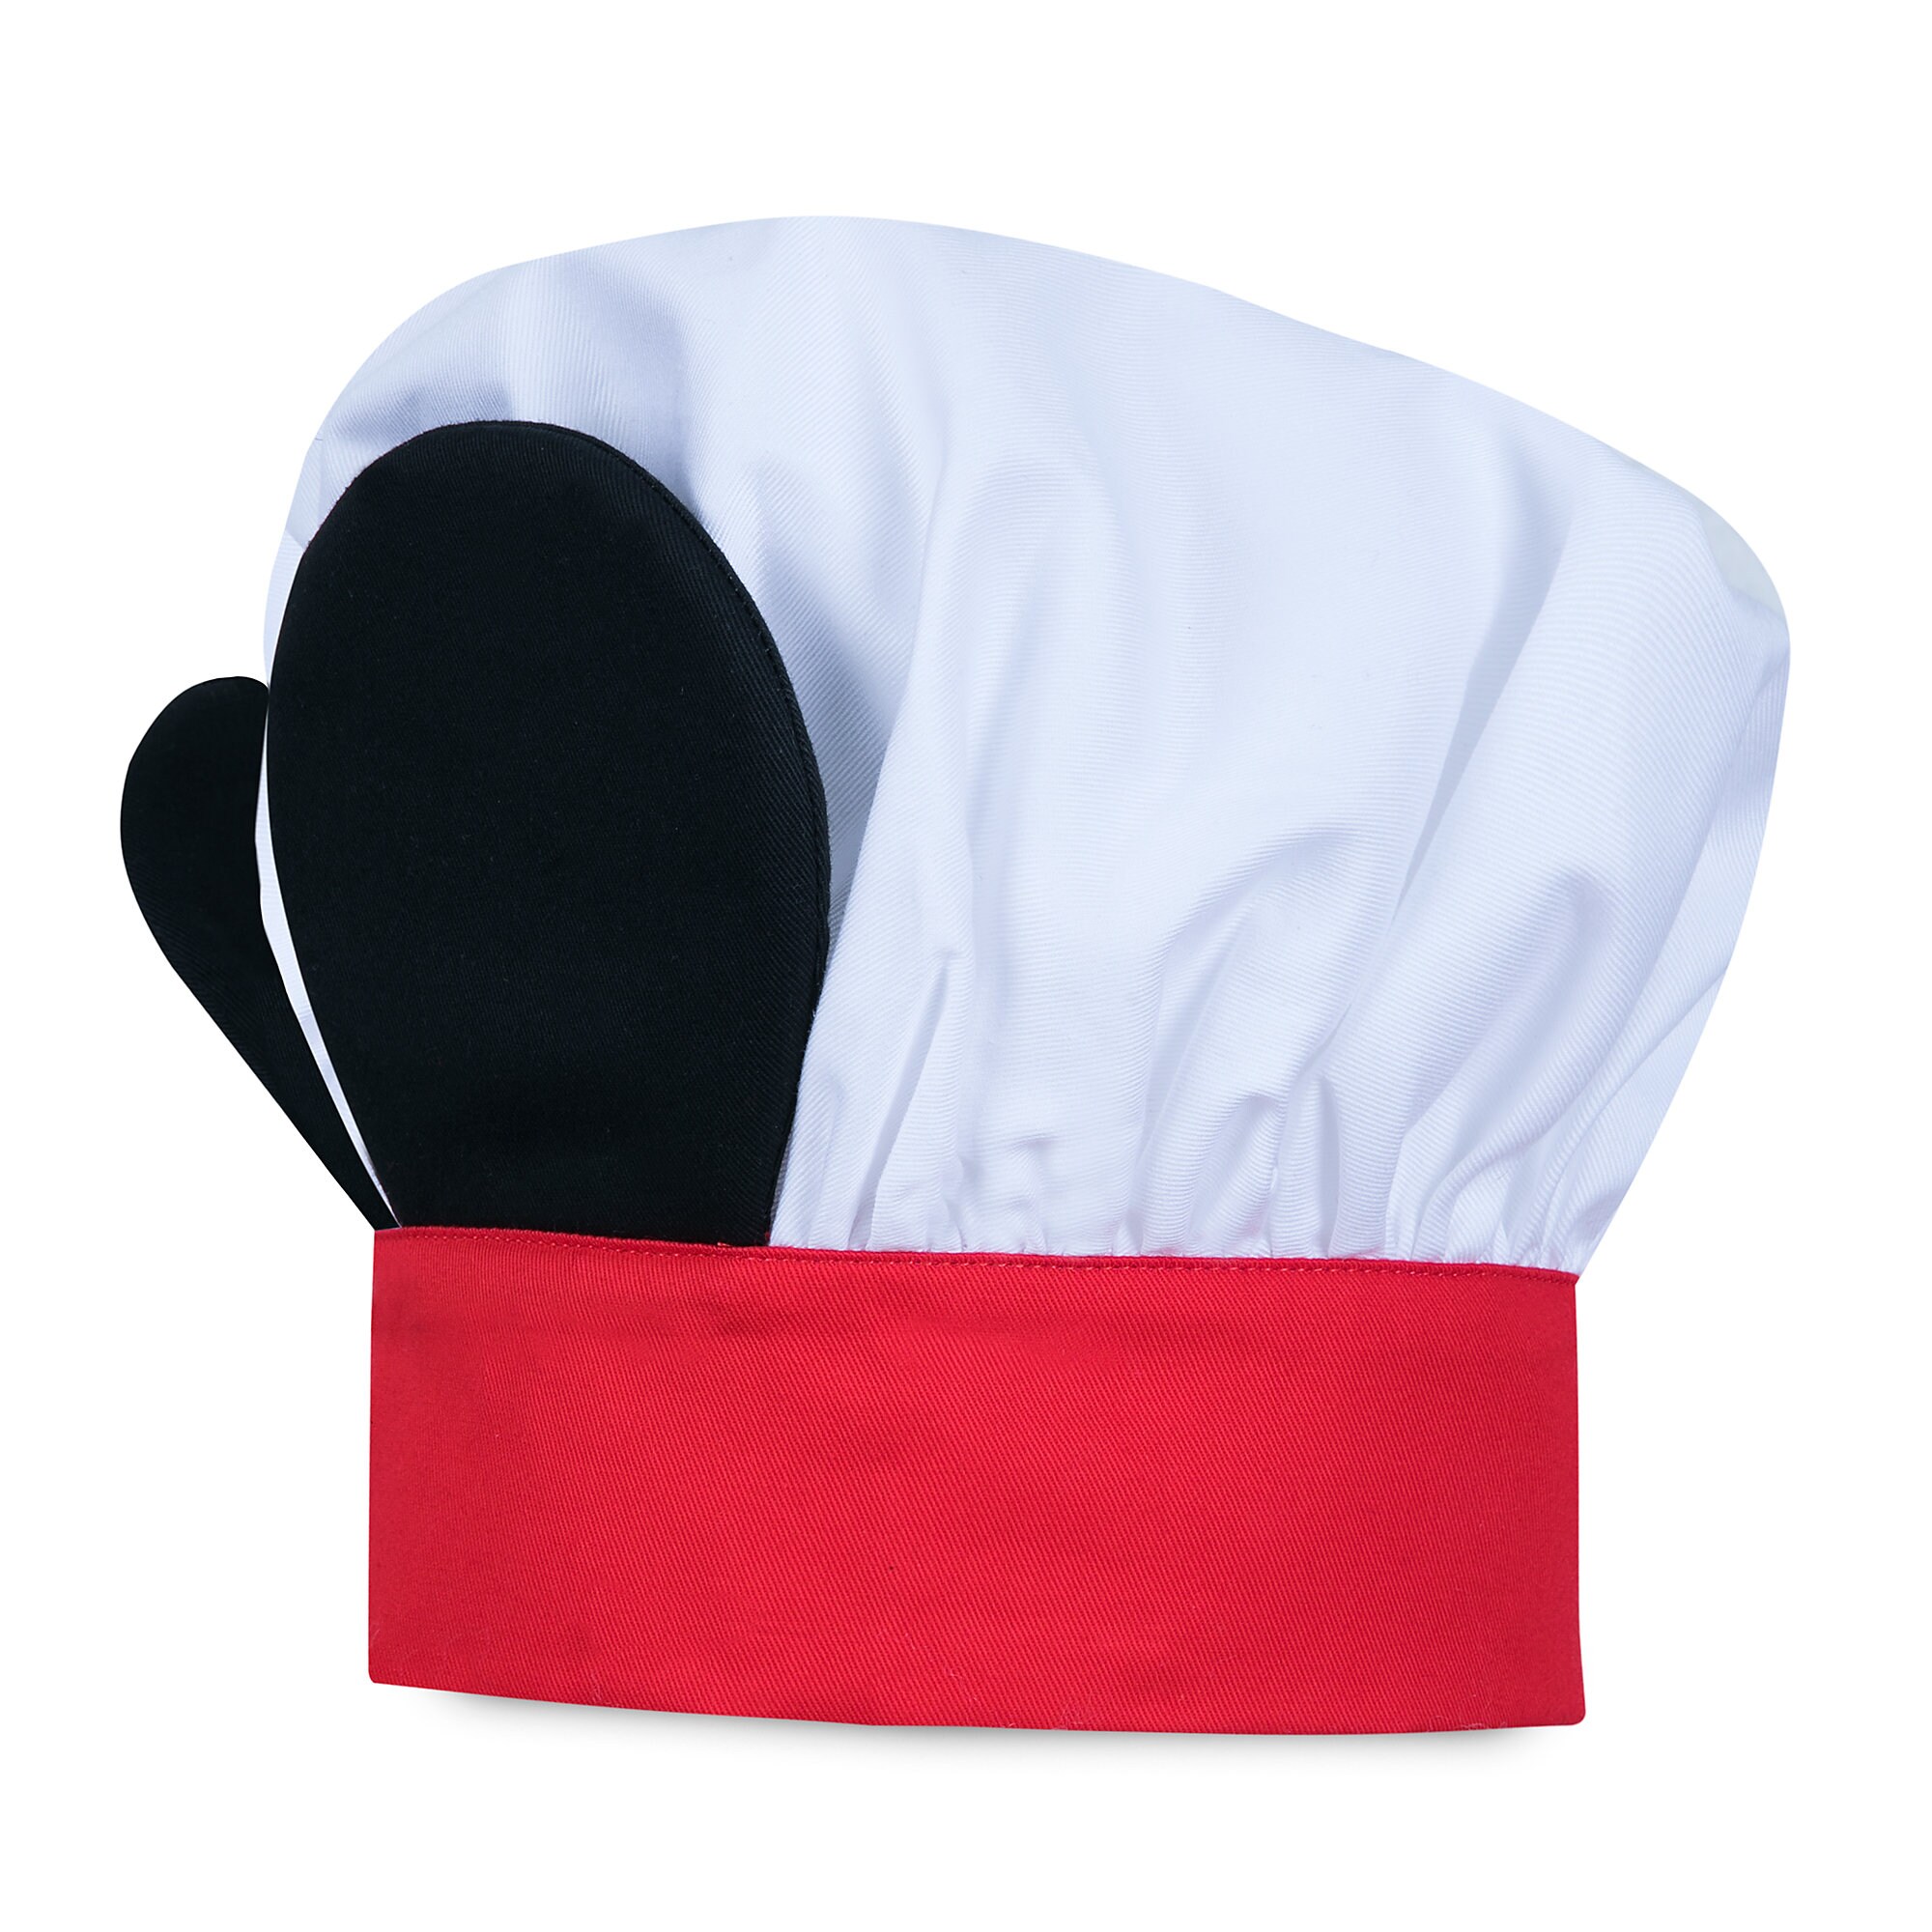 Mickey Mouse Apron and Chef's Hat Set for Kids - Personalizable